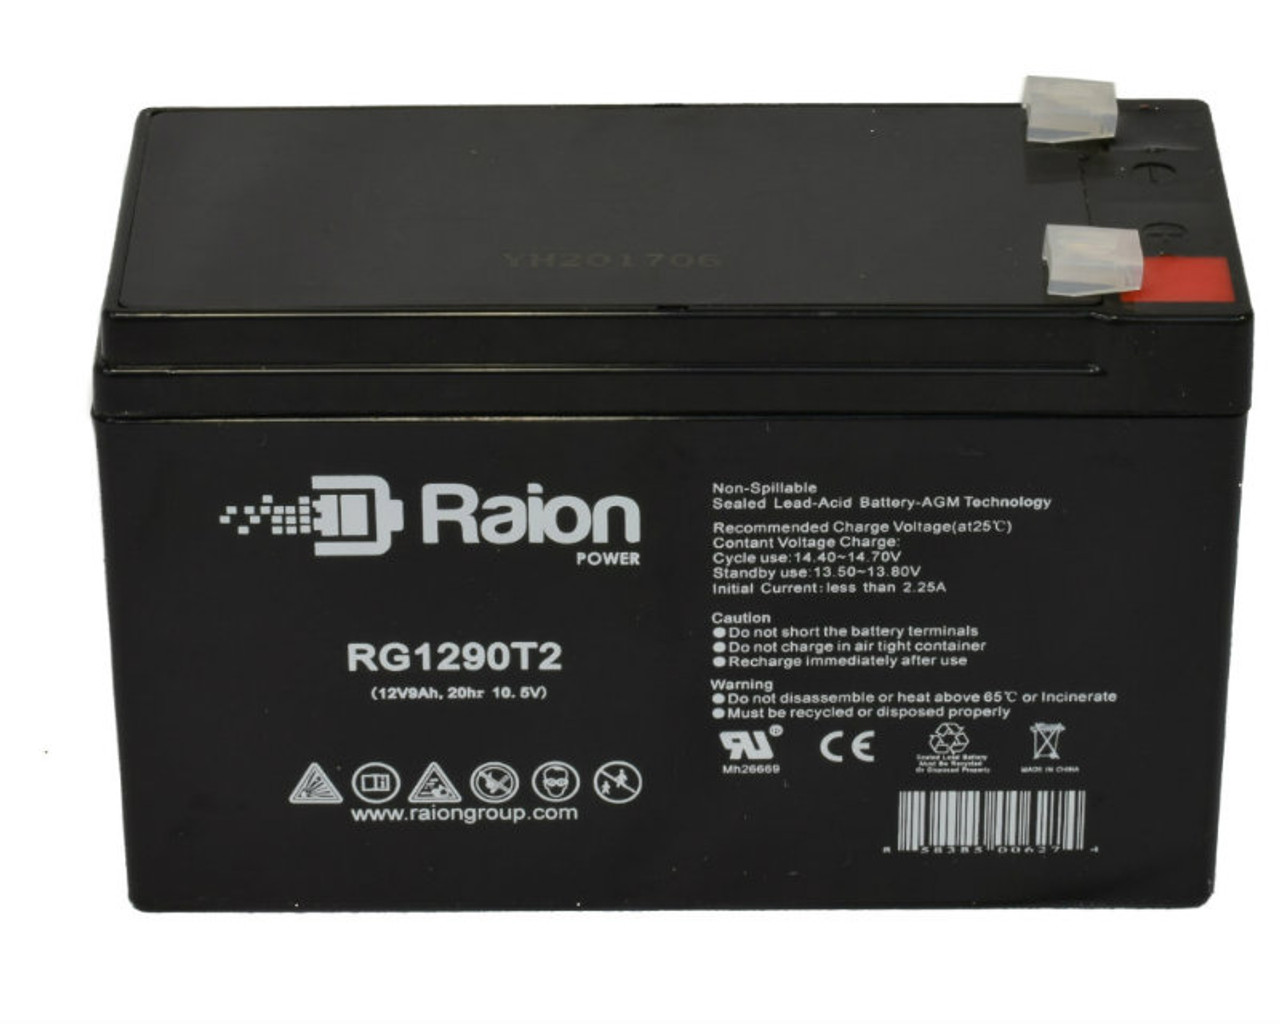 Raion Power RG1290T2 12V 9Ah Lead Acid Battery for Mongoose Scooter